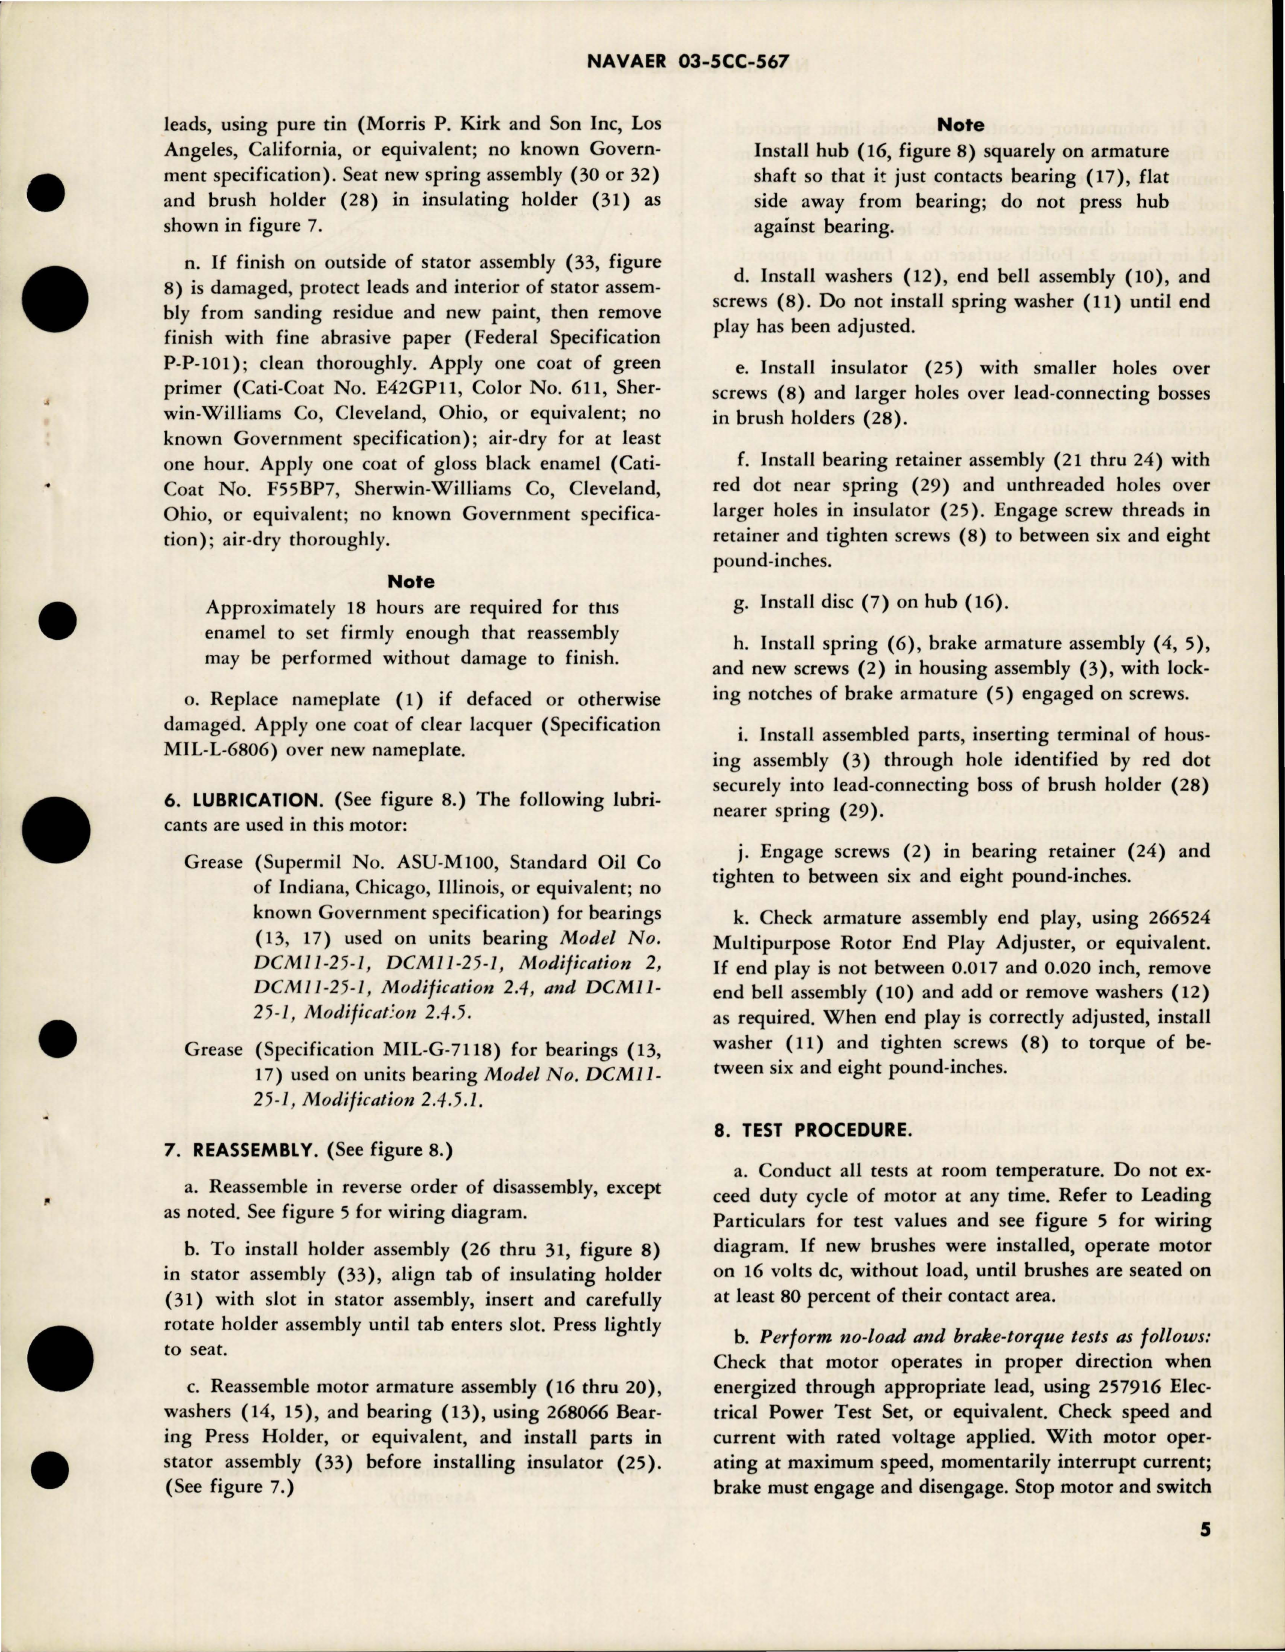 Sample page 5 from AirCorps Library document: Overhaul Instructions with Parts Breakdown for Aircraft Direct Current Motor - Part 36873 - Model DCM11-25-1